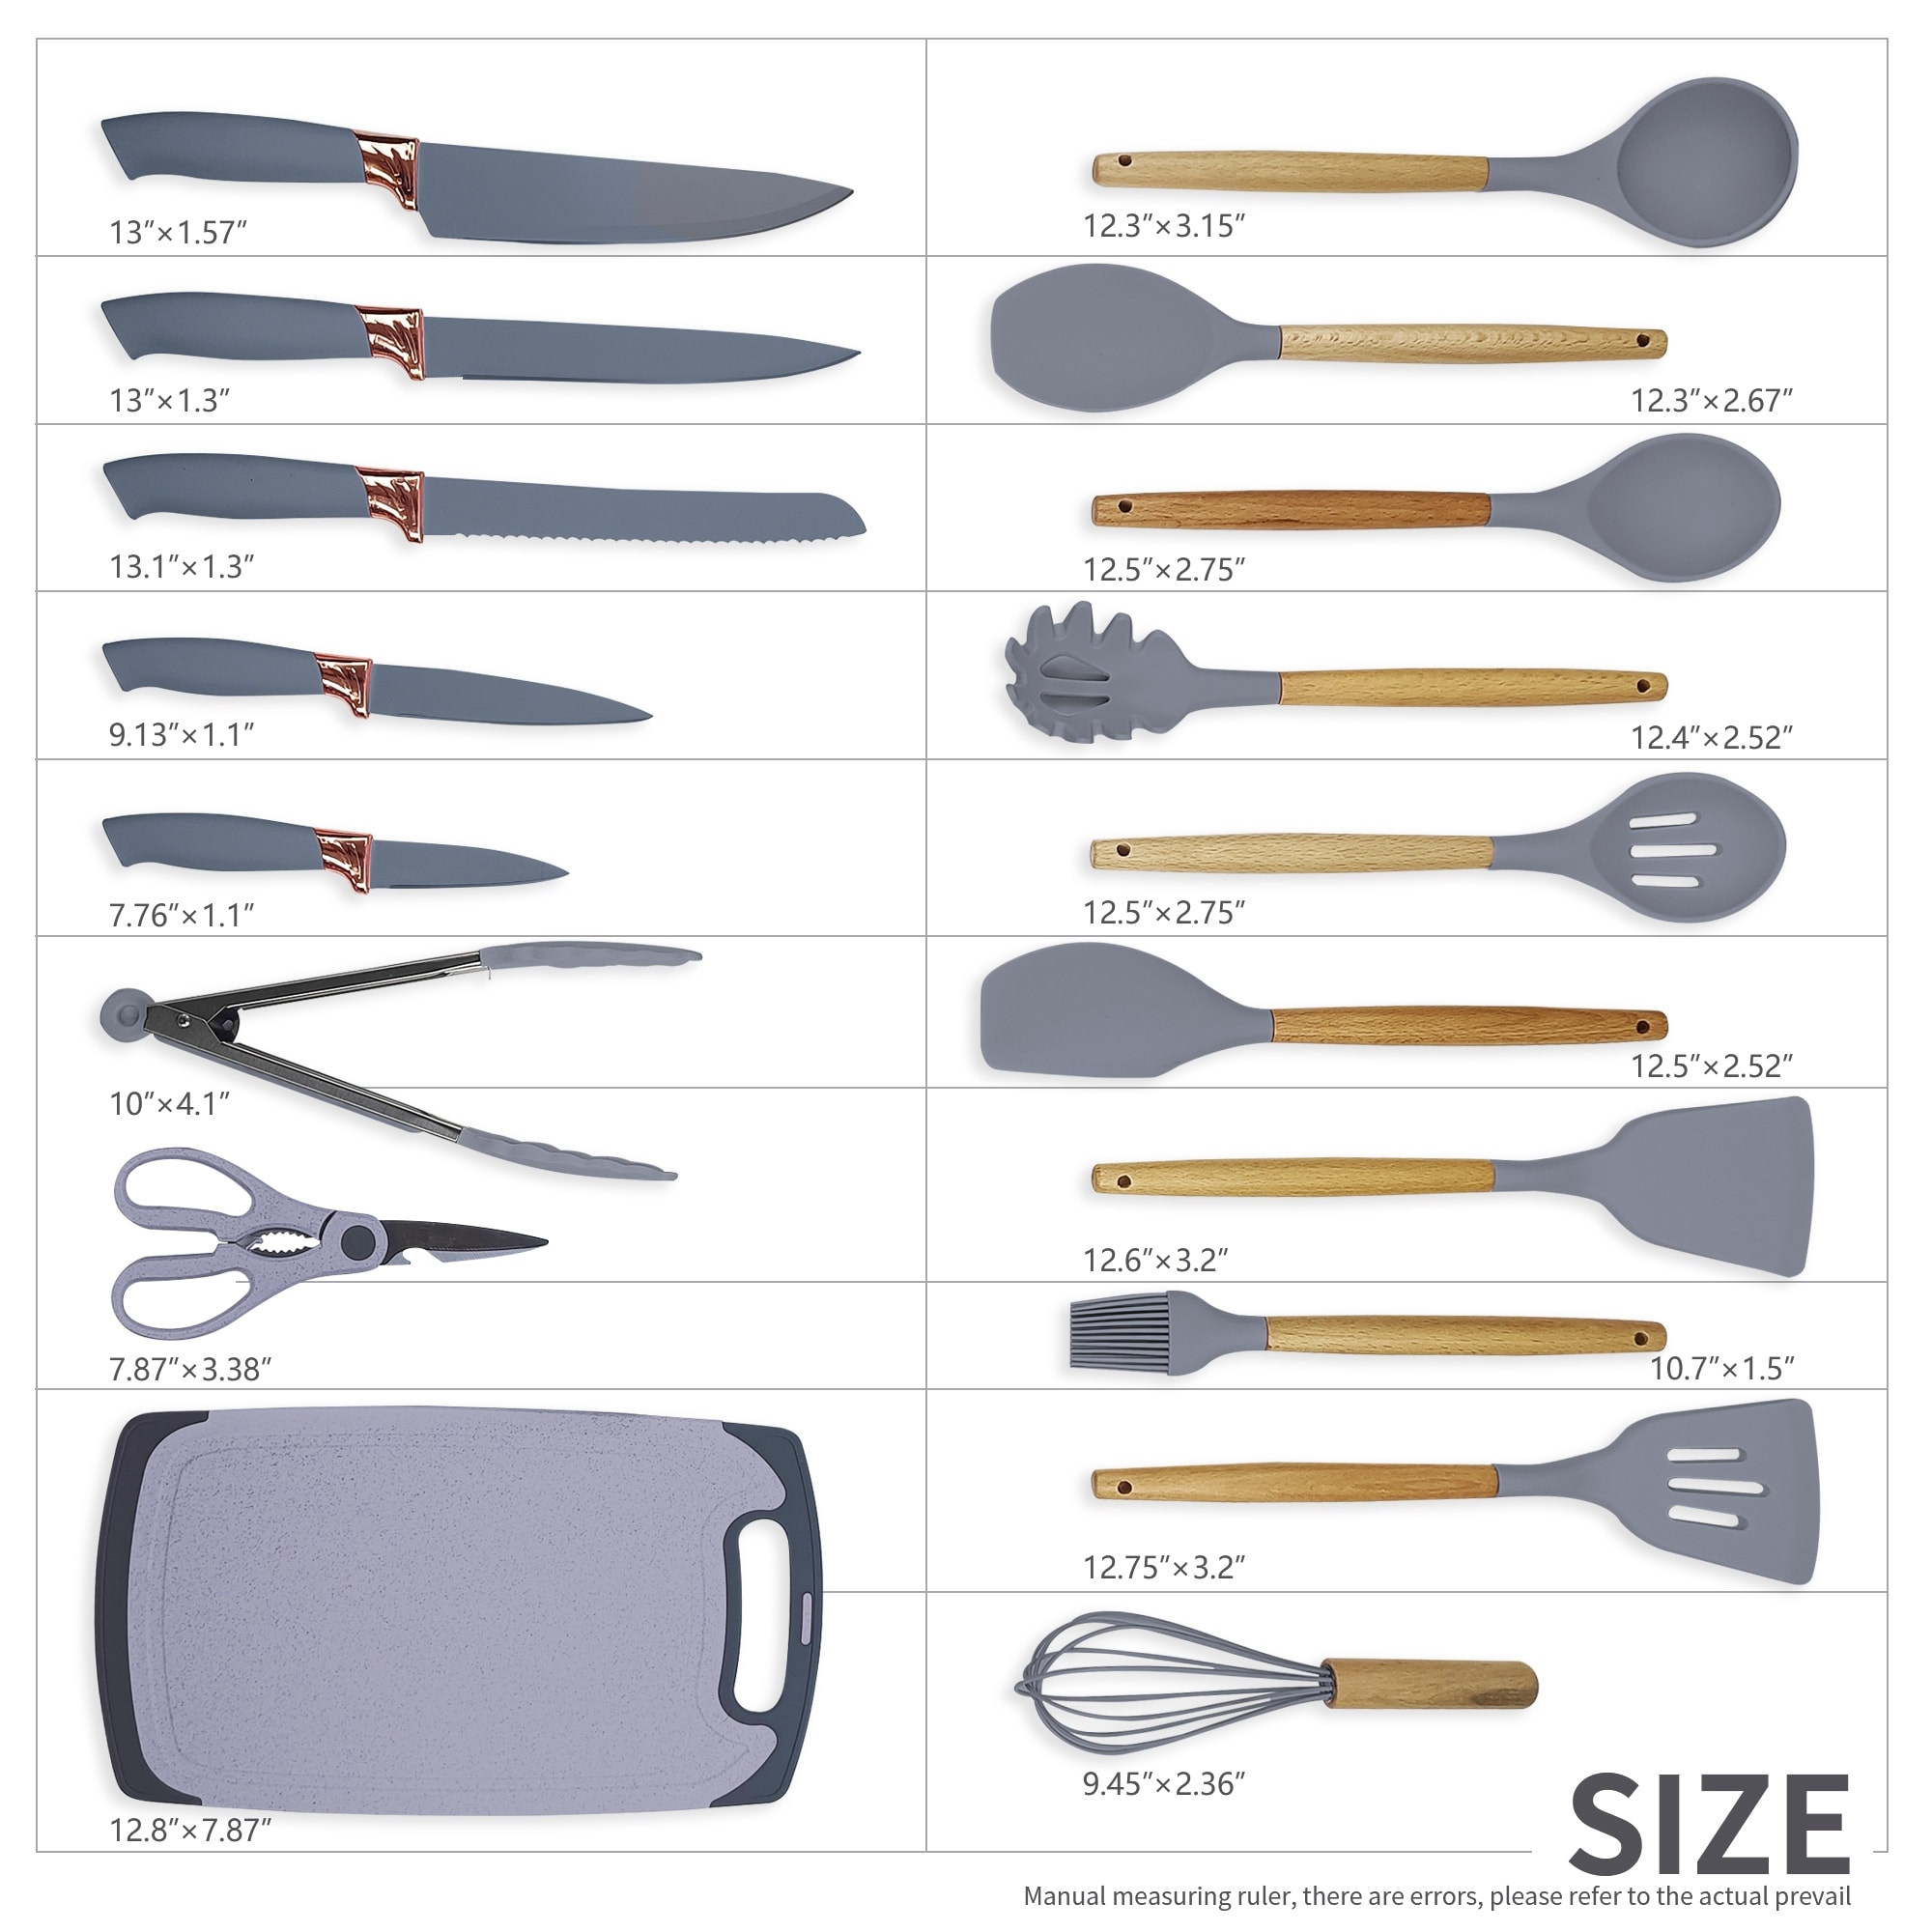 https://ak1.ostkcdn.com/images/products/is/images/direct/d659e6b9265121ca5aa101f6eaab6a56a7615d91/19-piece-Non-stick-Silicone-Assorted-Kitchen-Utensil-Set.jpg